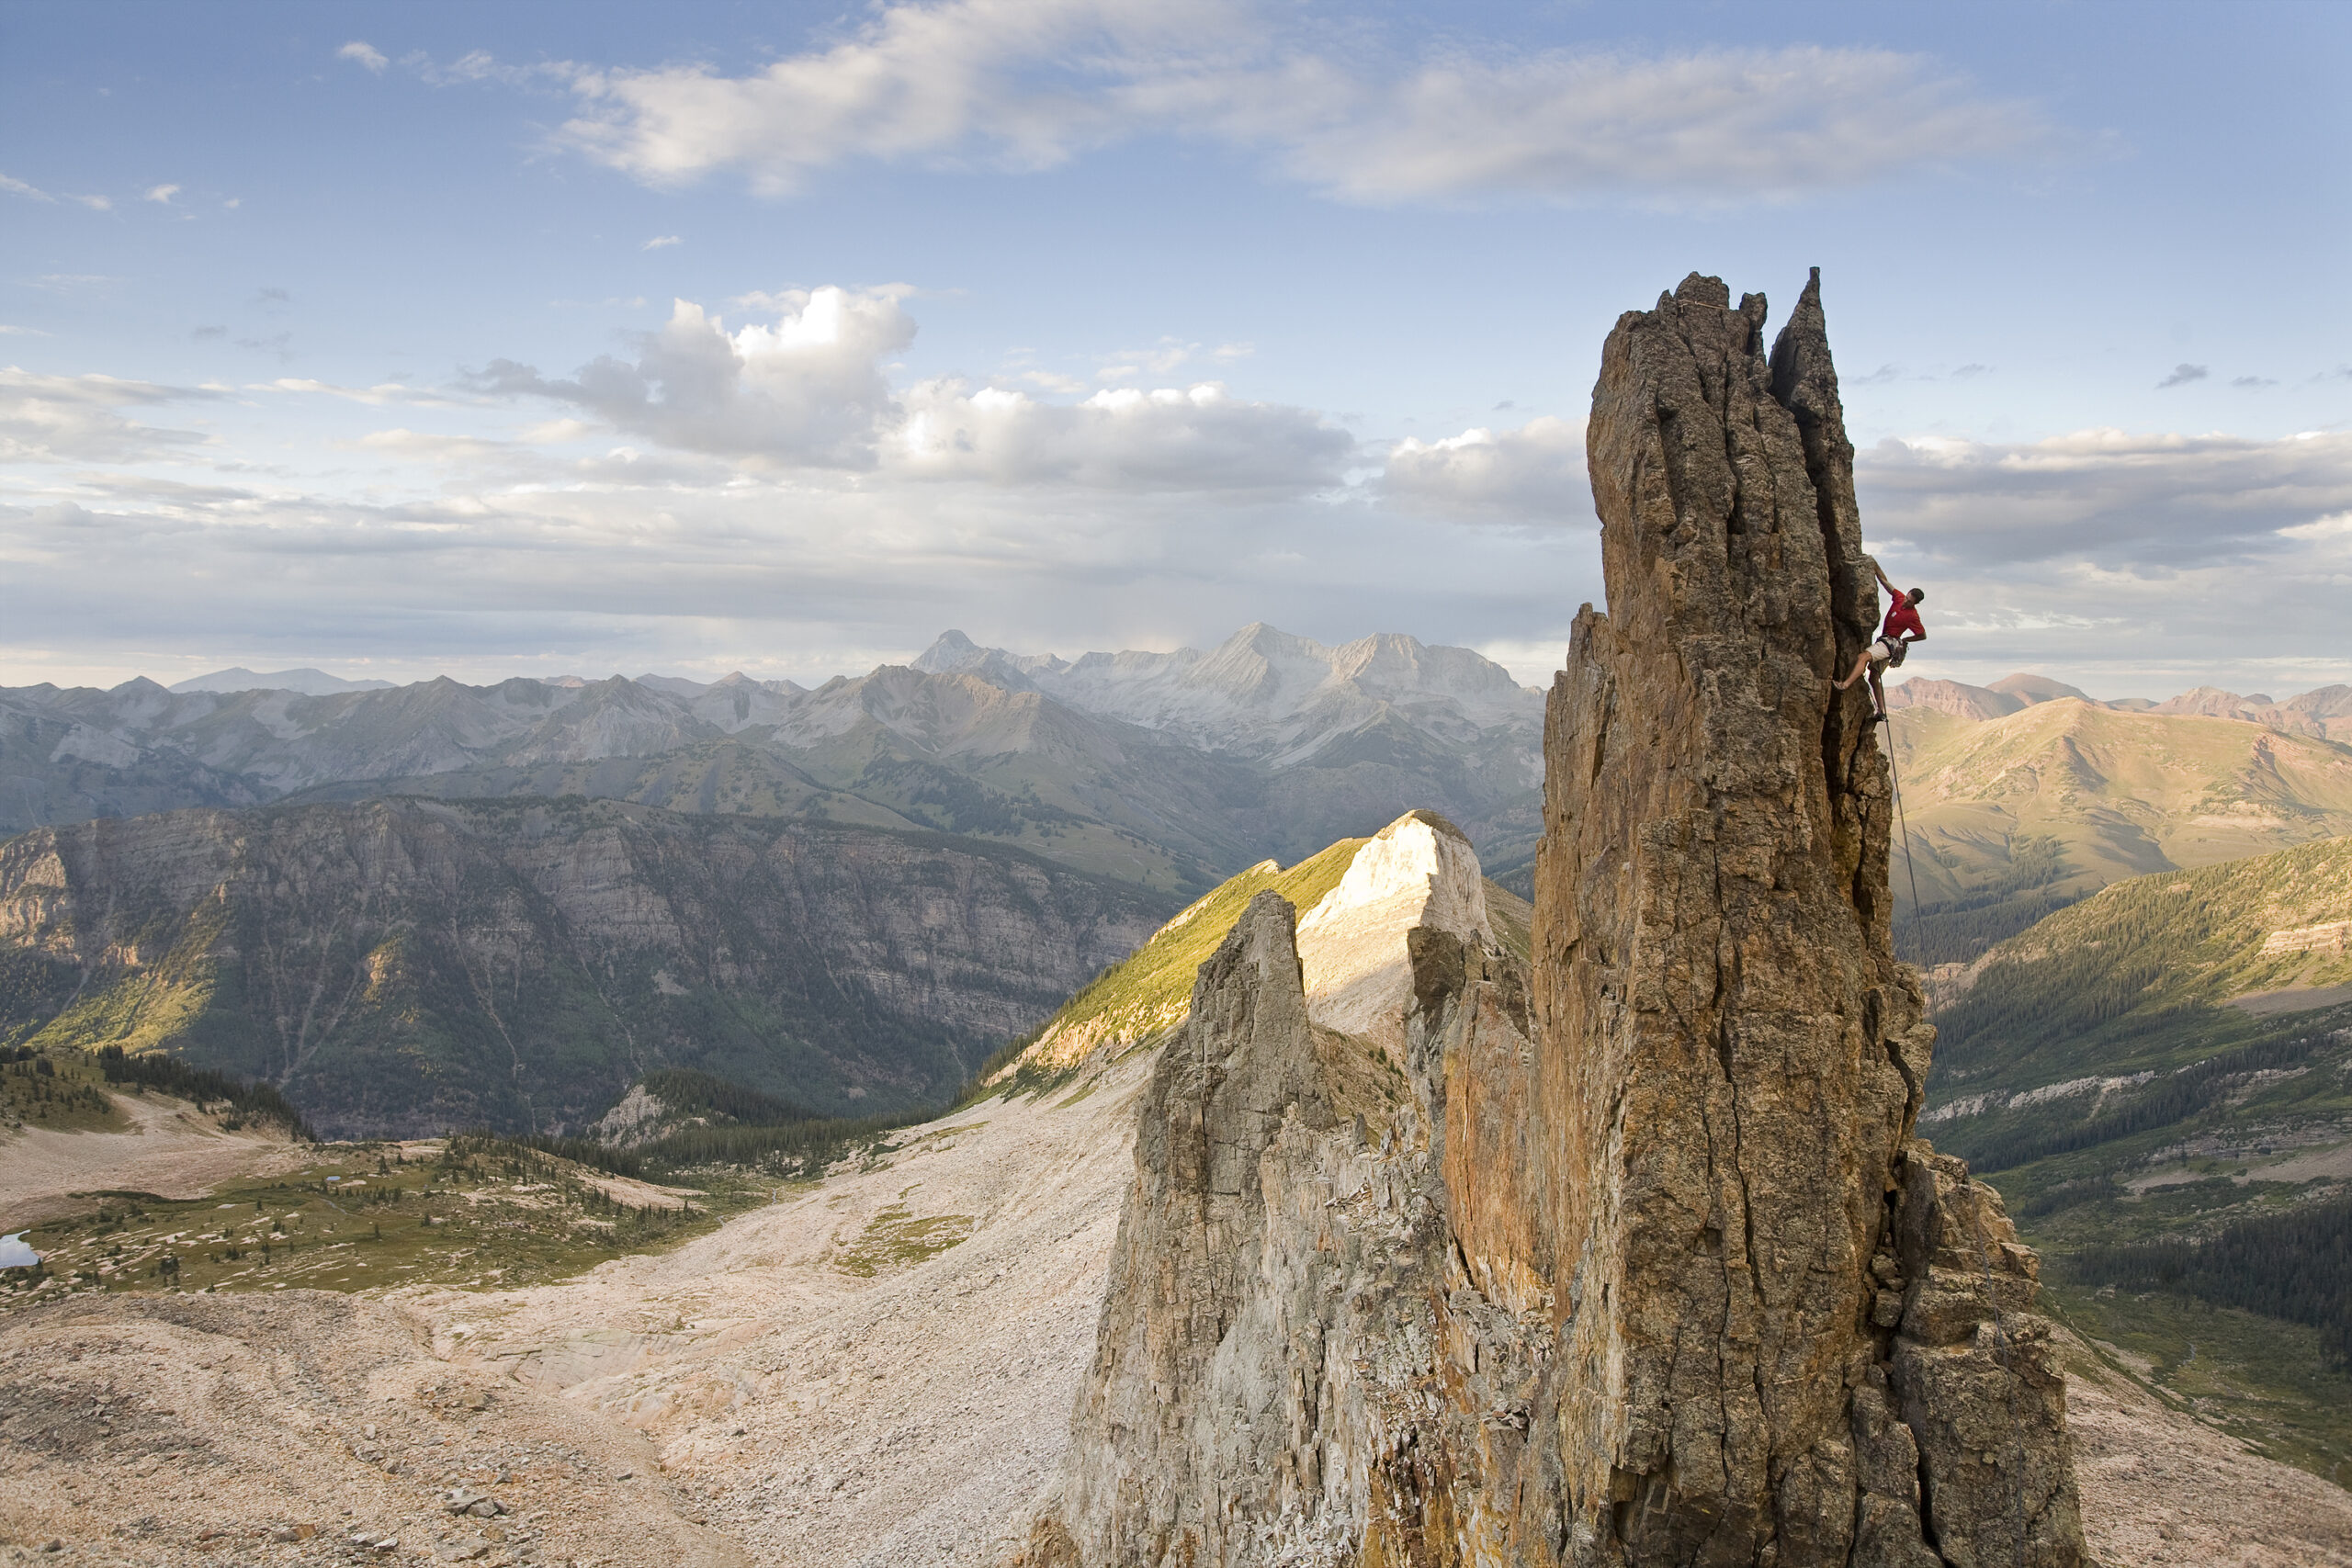 In this photo, at an elevation of 13,000 feet in the Elk Mountain Range, Michael Schneiter stands triumphantly atop a spire on Treasure Mountain.